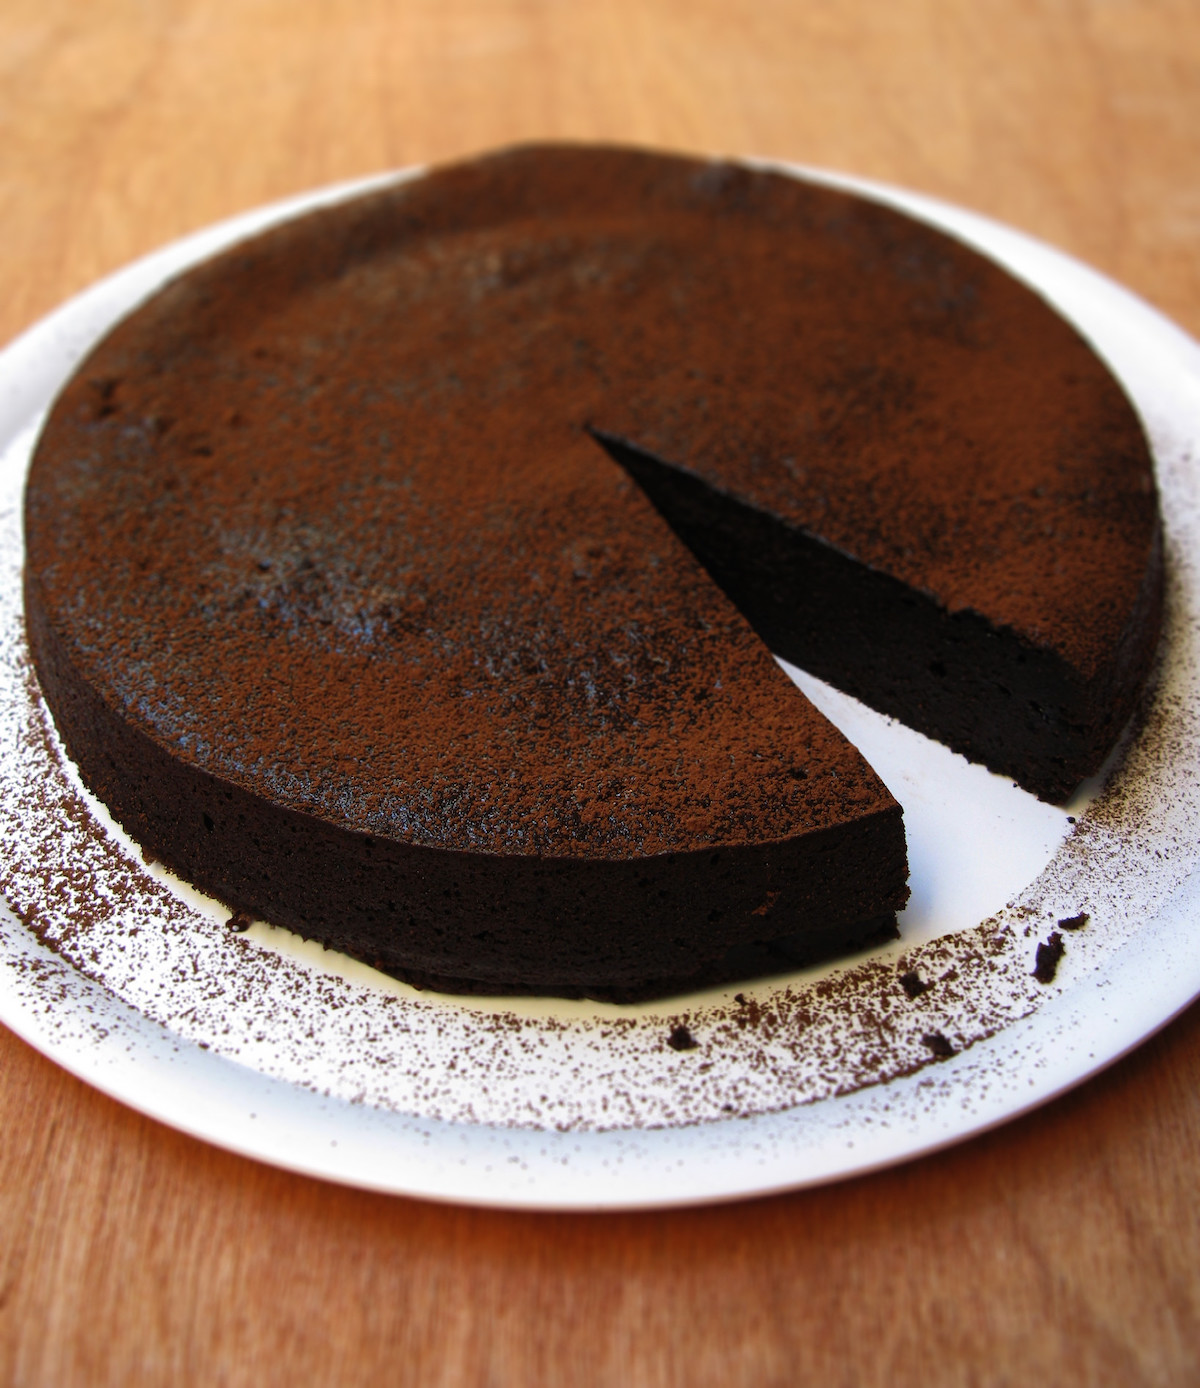 A deeply colored chocolate Caprese cake dusted with cocoa powder sits on a white plate